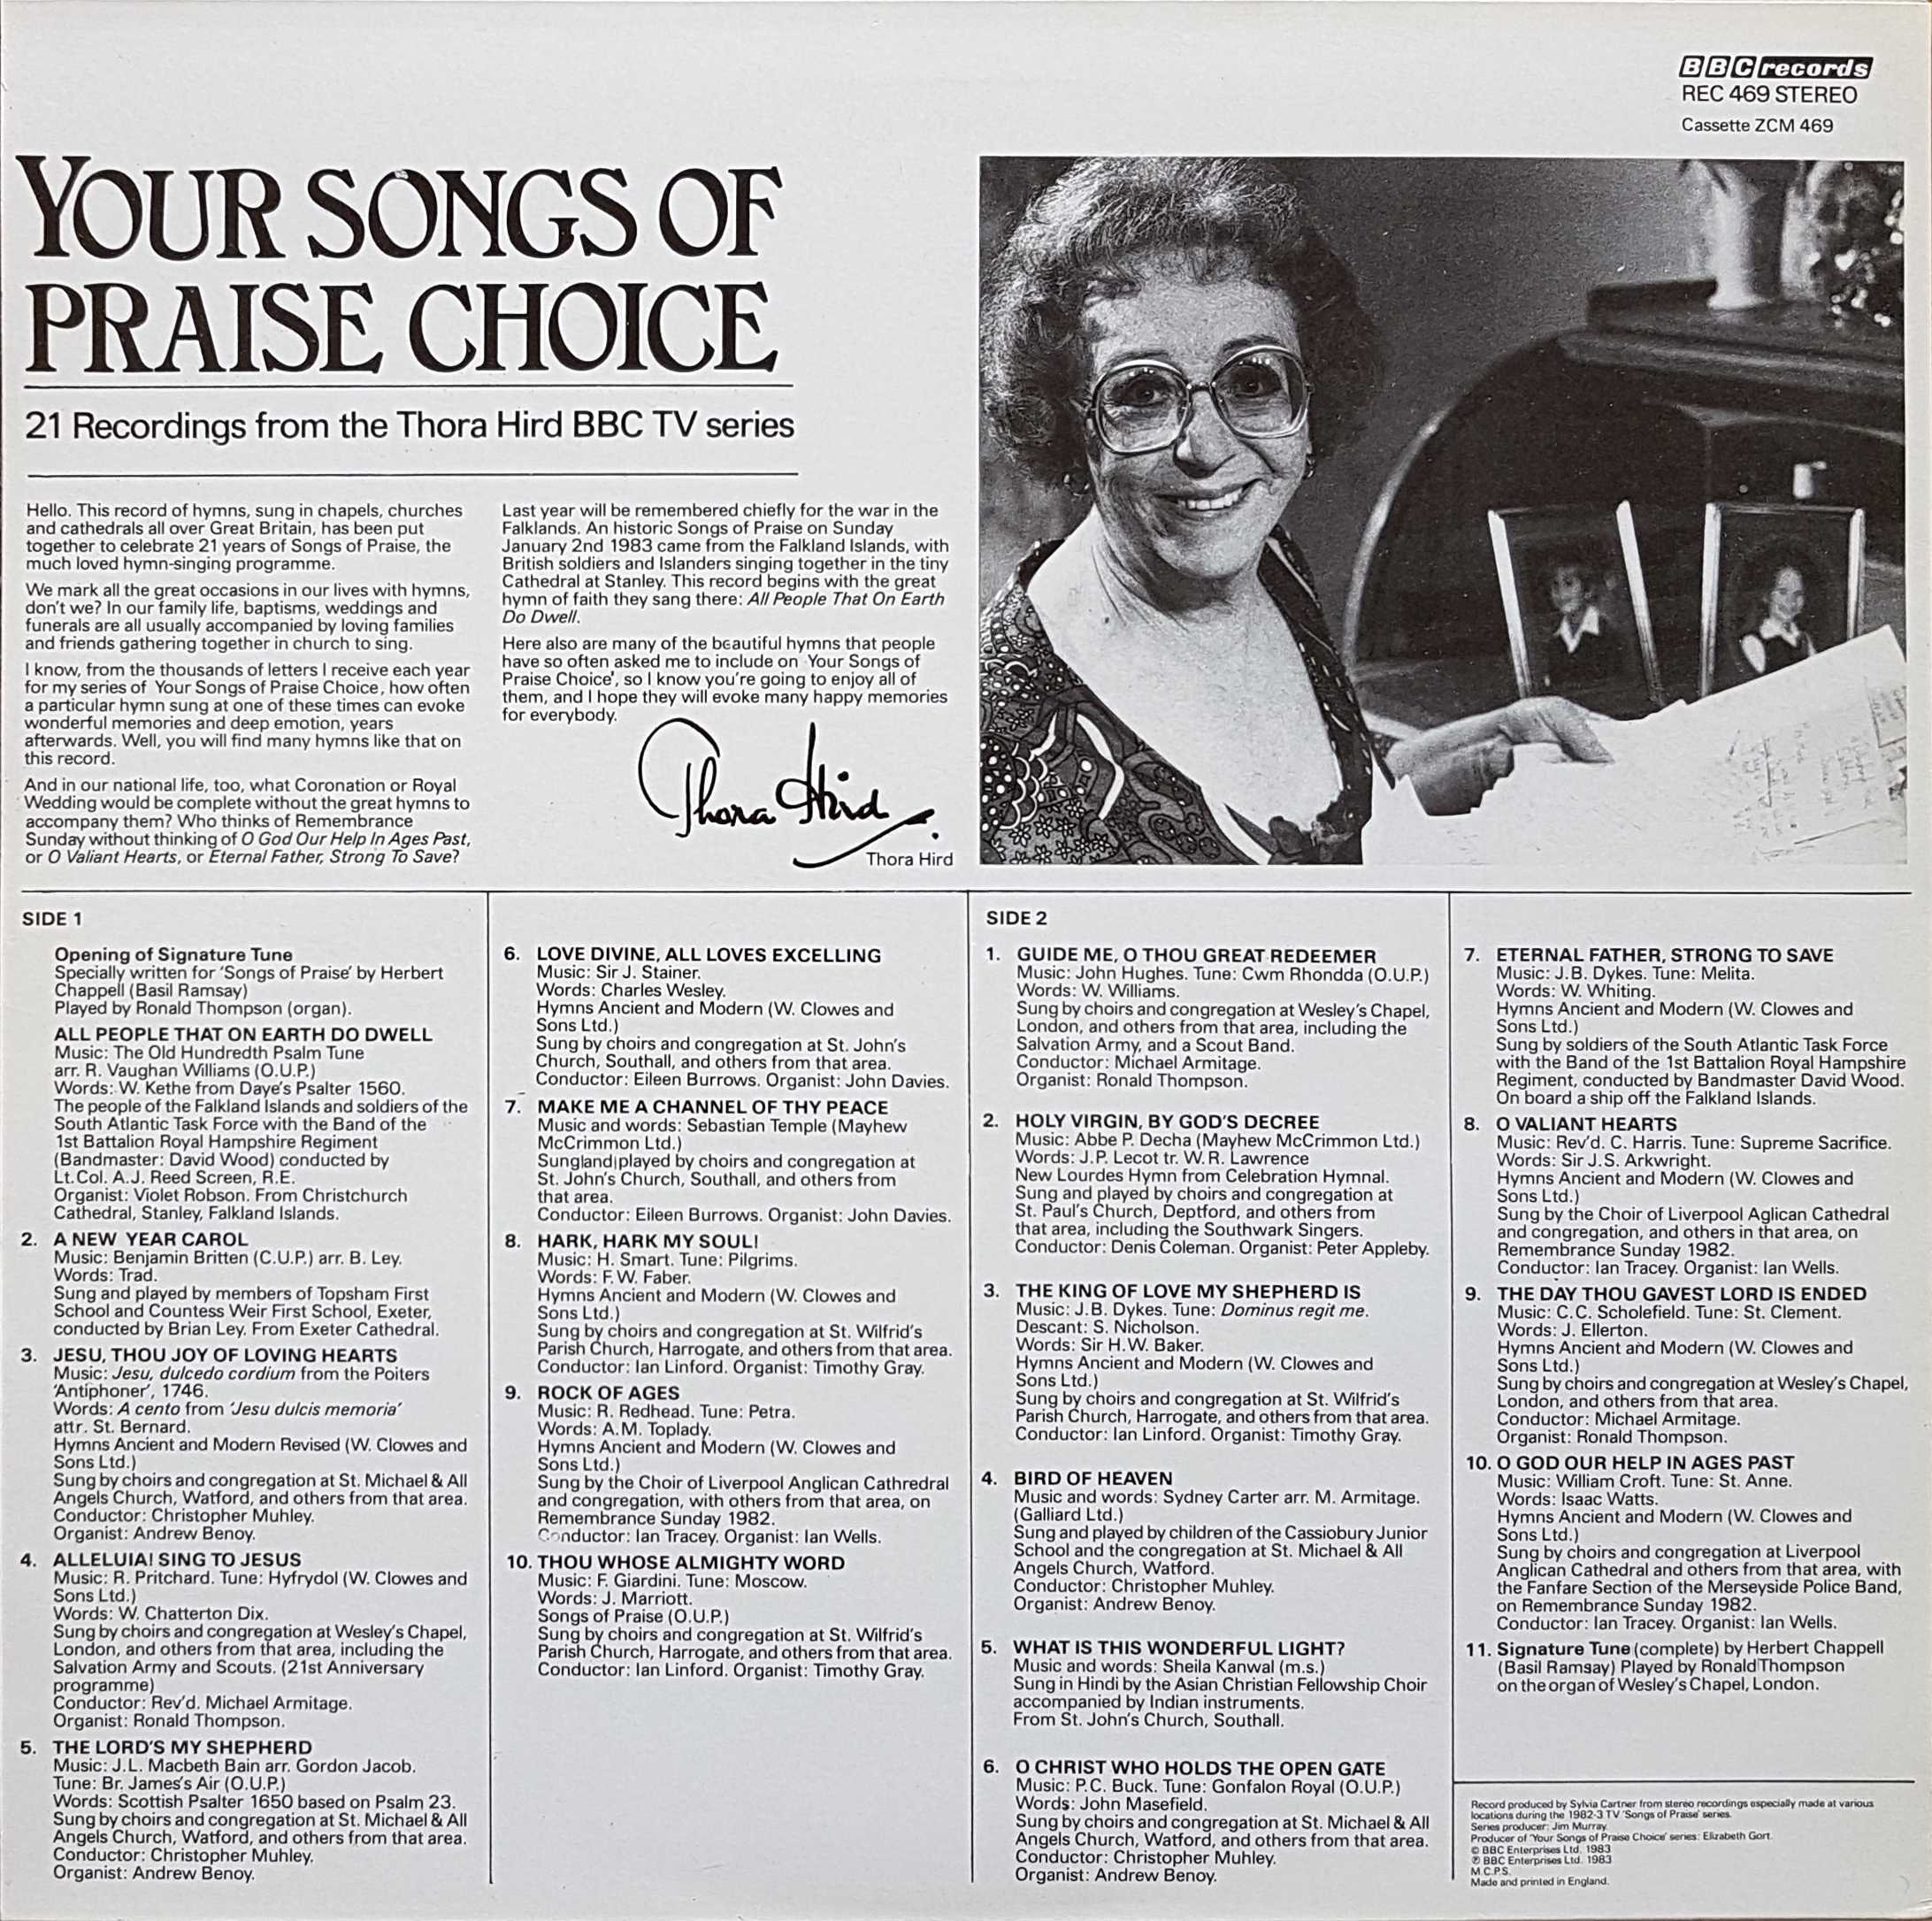 Picture of REC 469 Your songs of praise choice by artist Thora Hird  from the BBC records and Tapes library